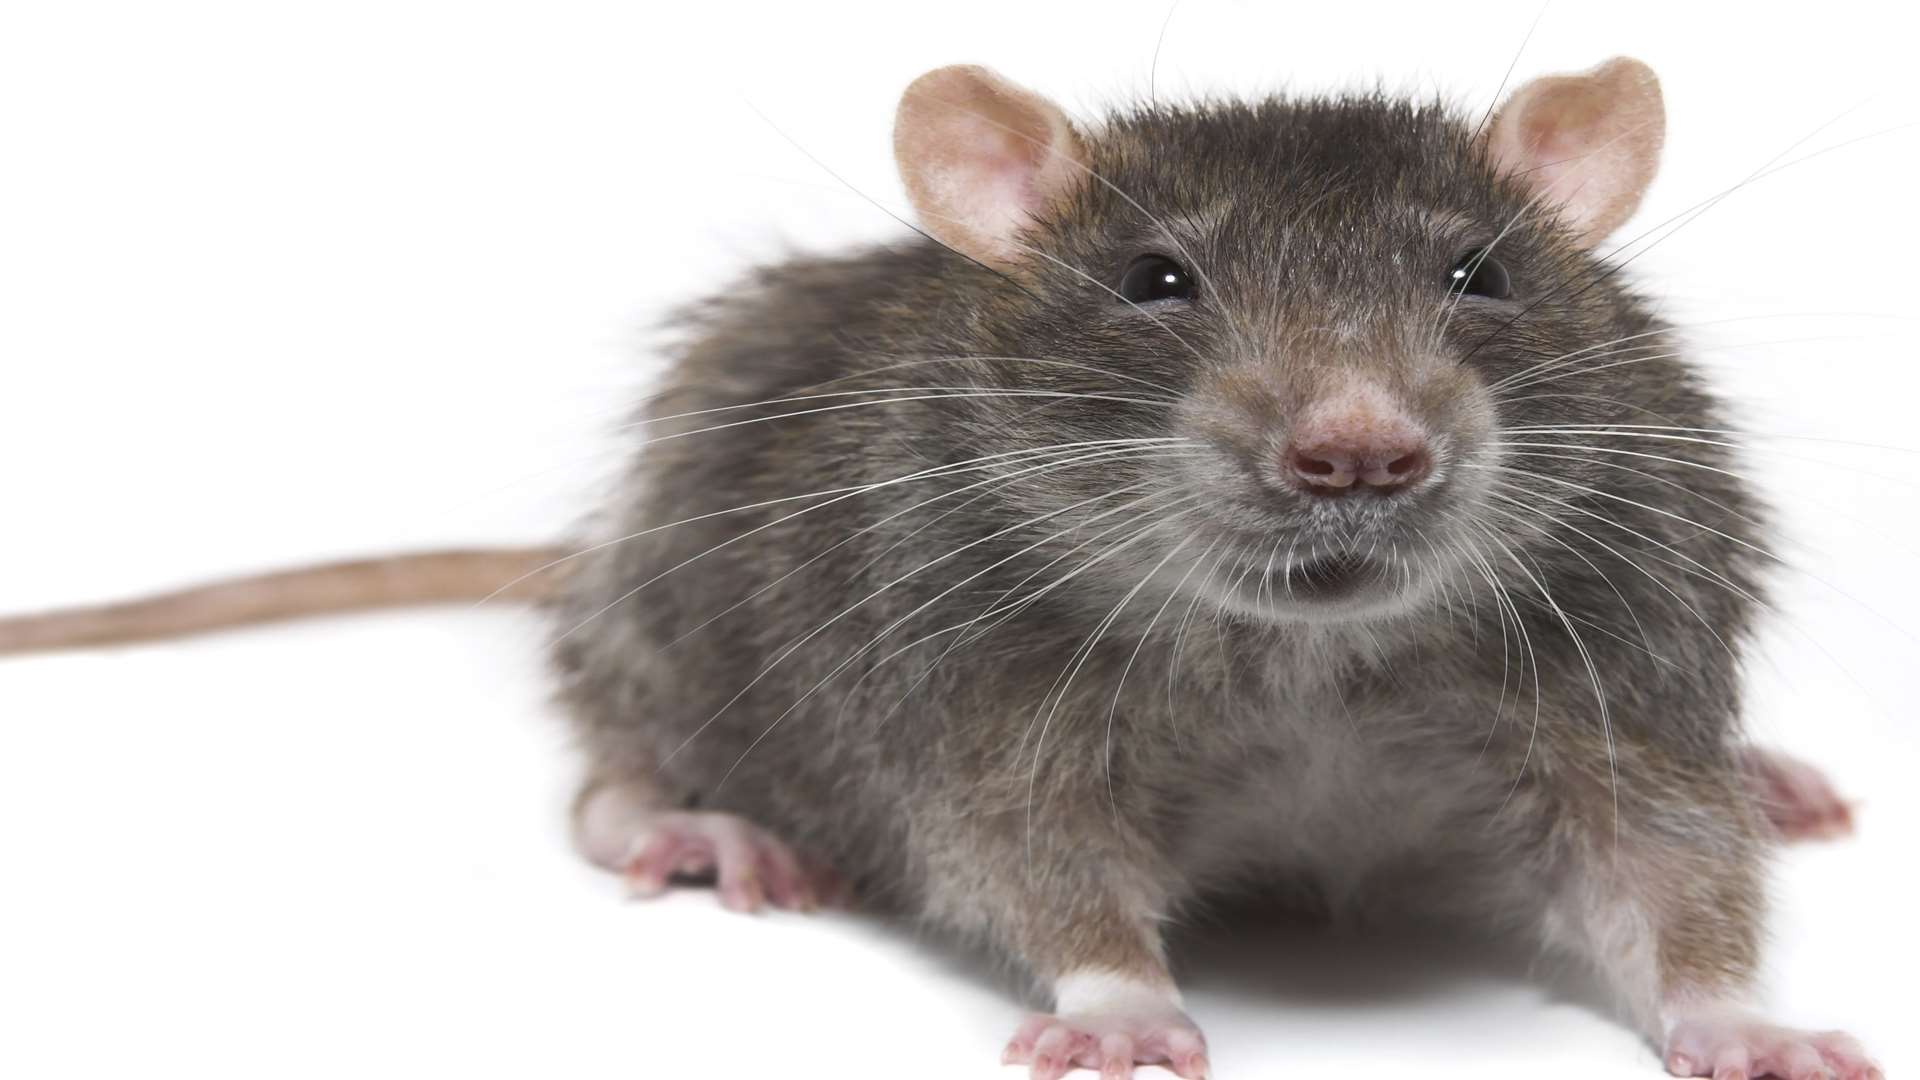 A rat was spotted in the cafe. Picture: Thinkstock